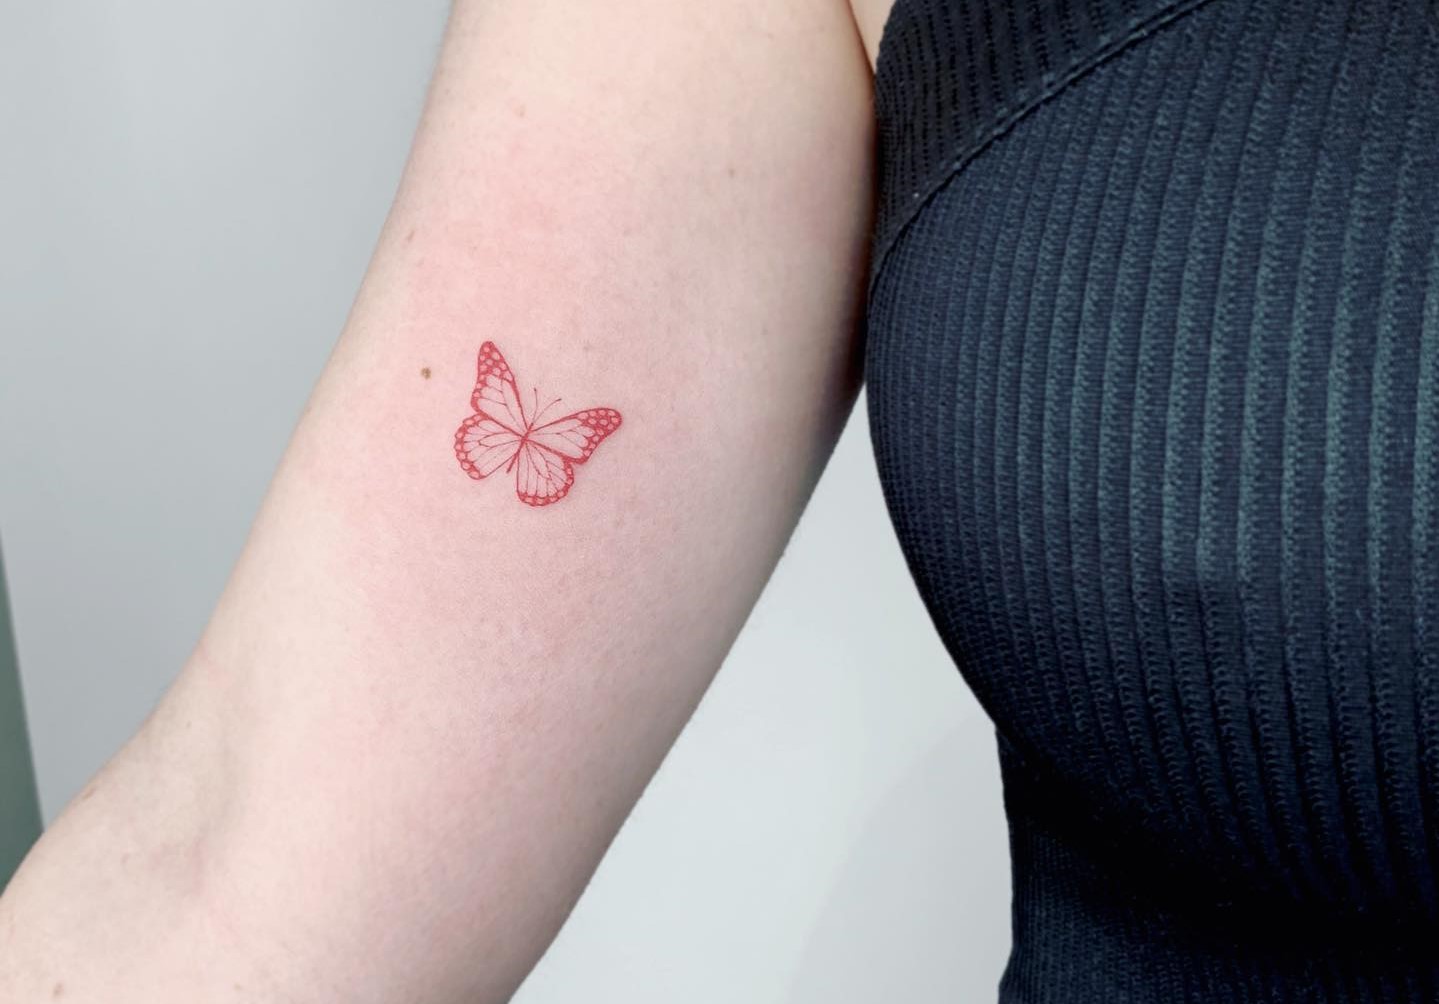 Single needle butterfly tattoo on the inner forearm